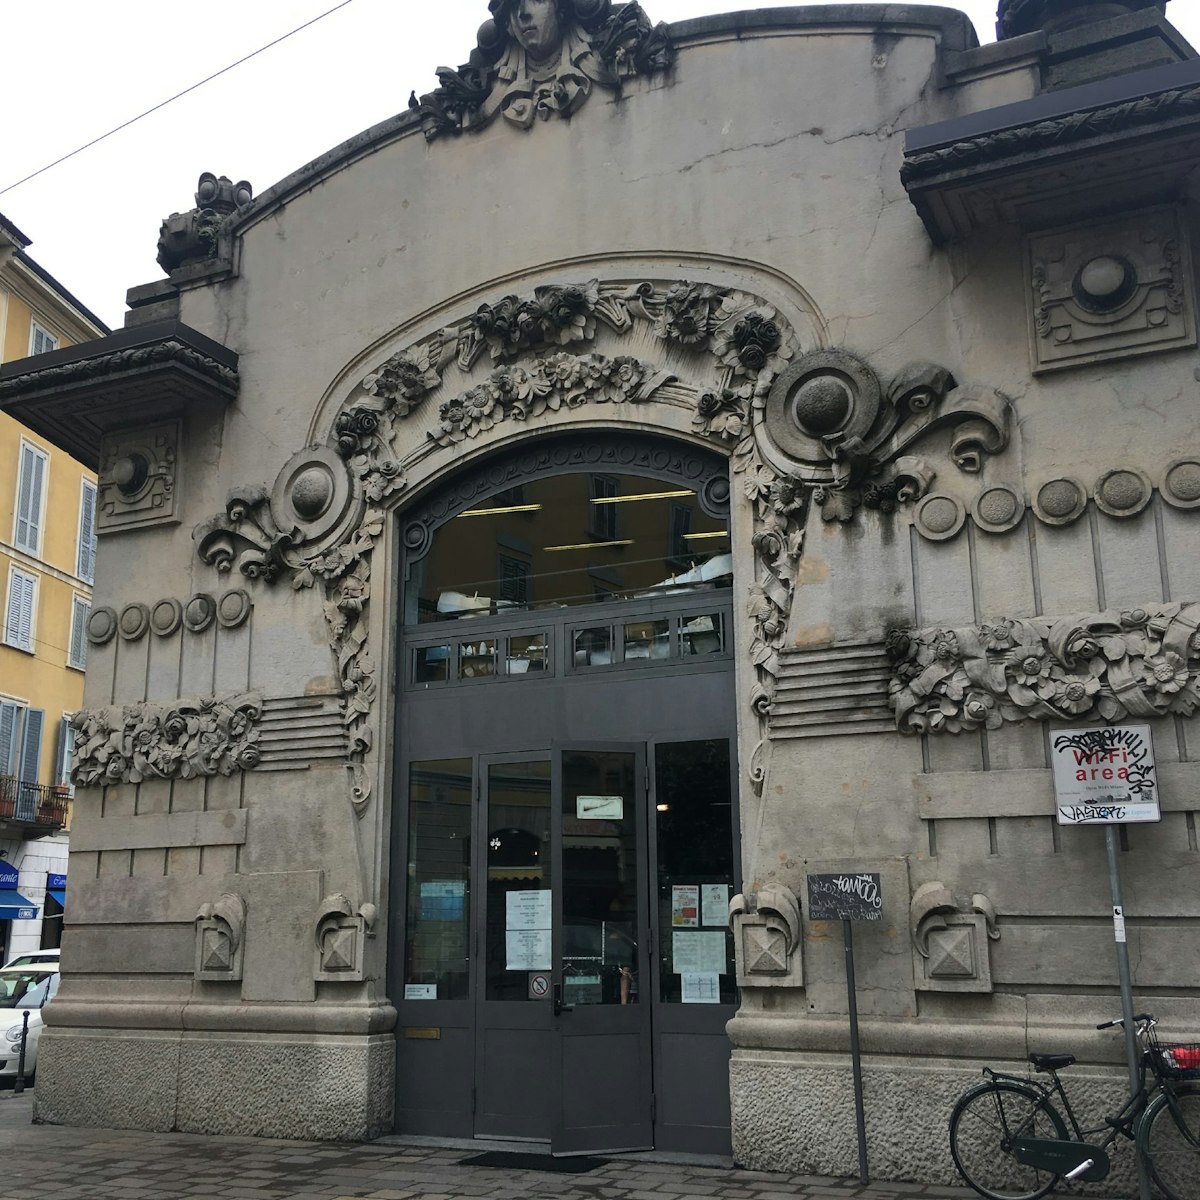 The entrance to the former Cinema Dumont